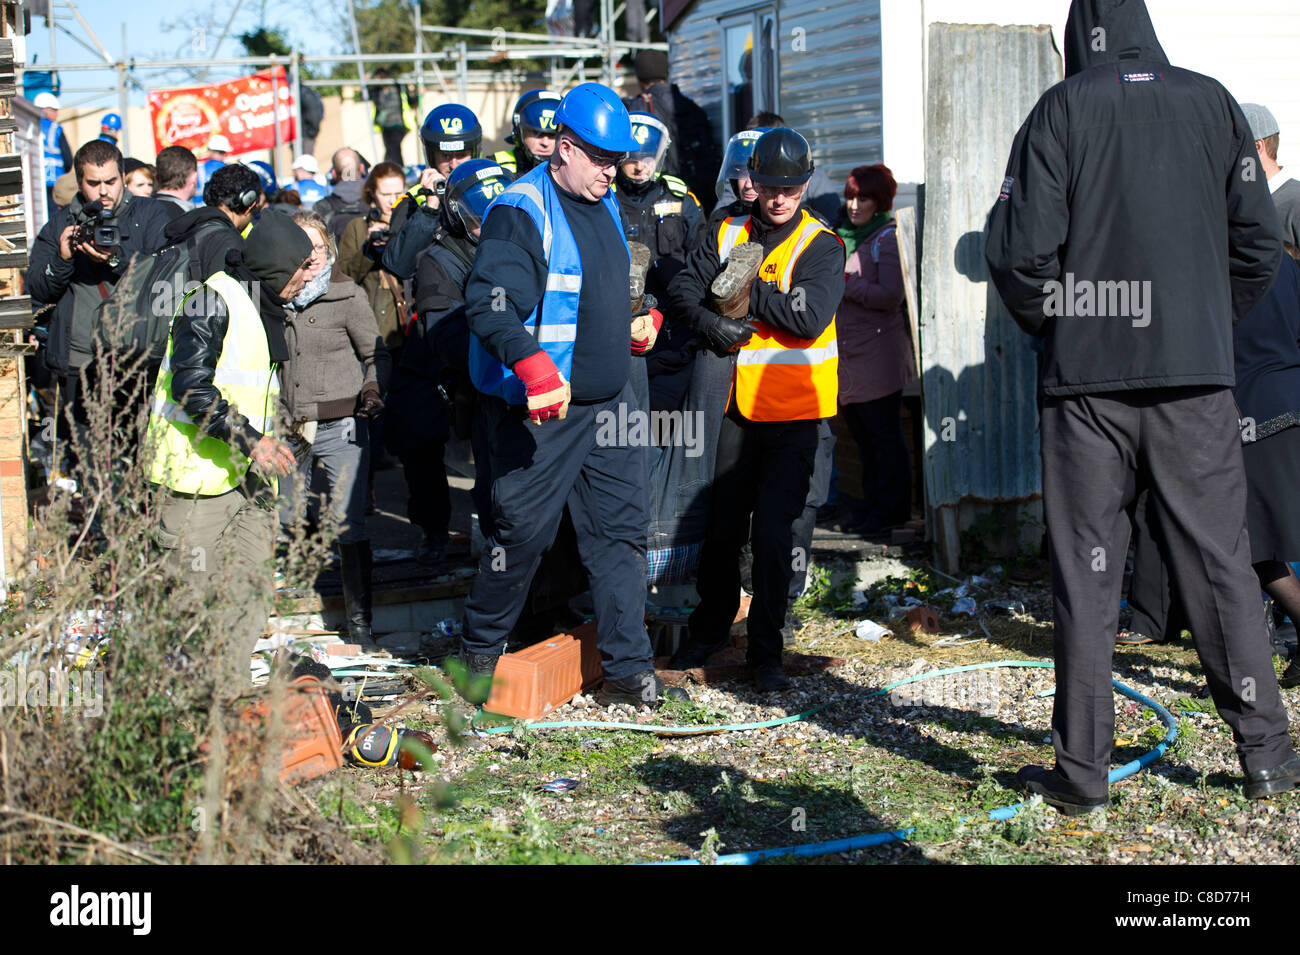 Dale Farm eviction. Police and bailiffs carry out a protester who has been arrested. Stock Photo